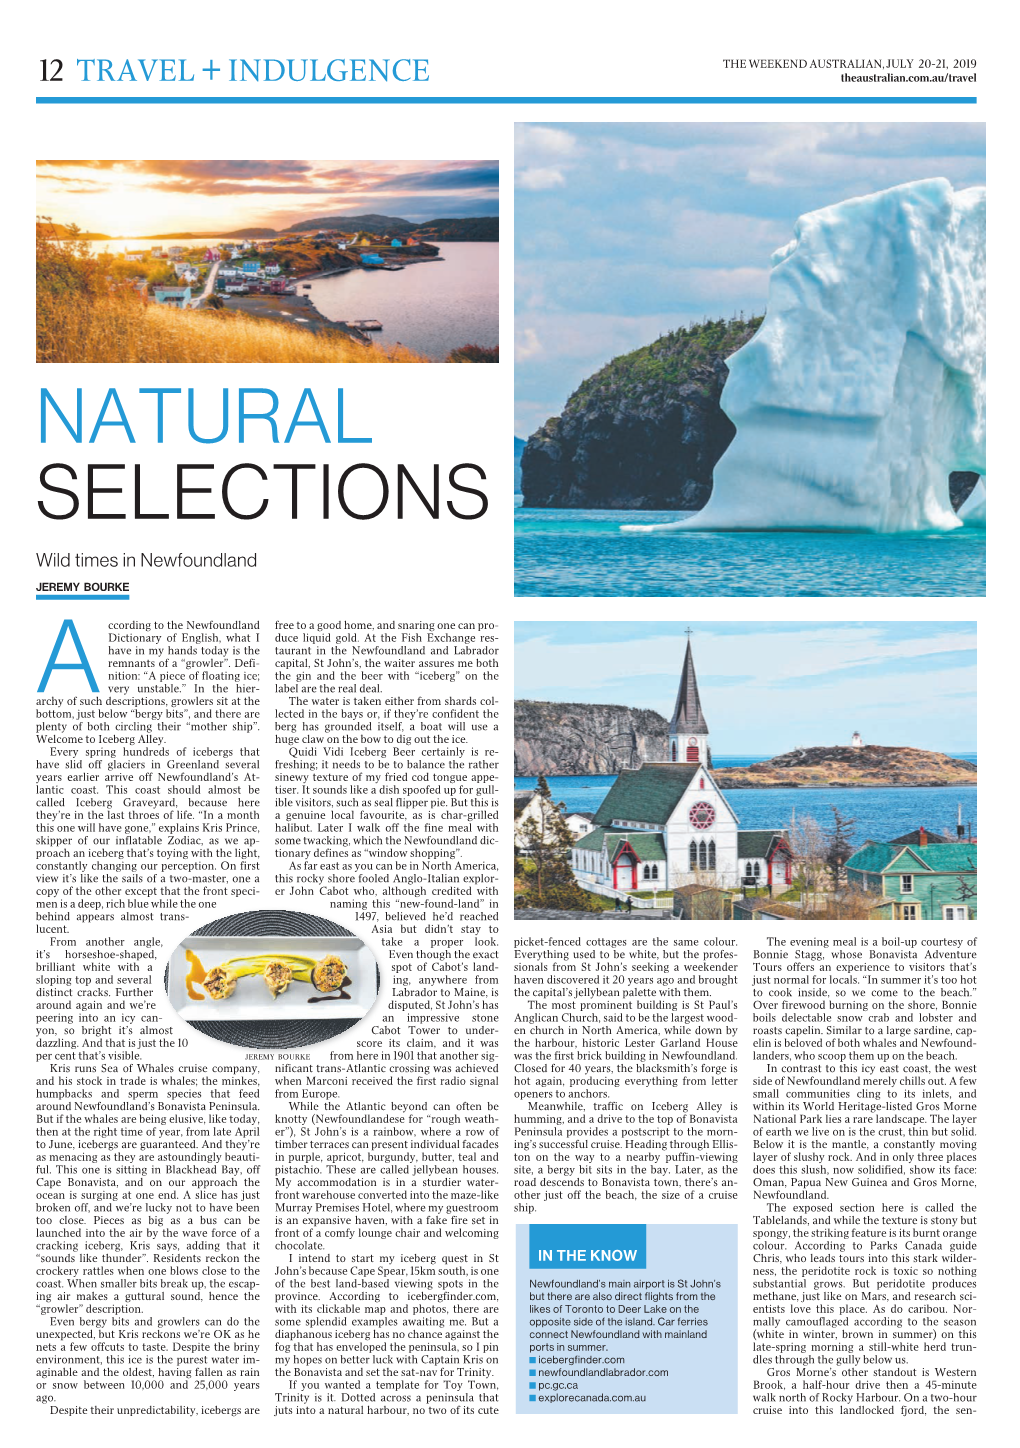 NATURAL SELECTIONS Wild Times in Newfoundland